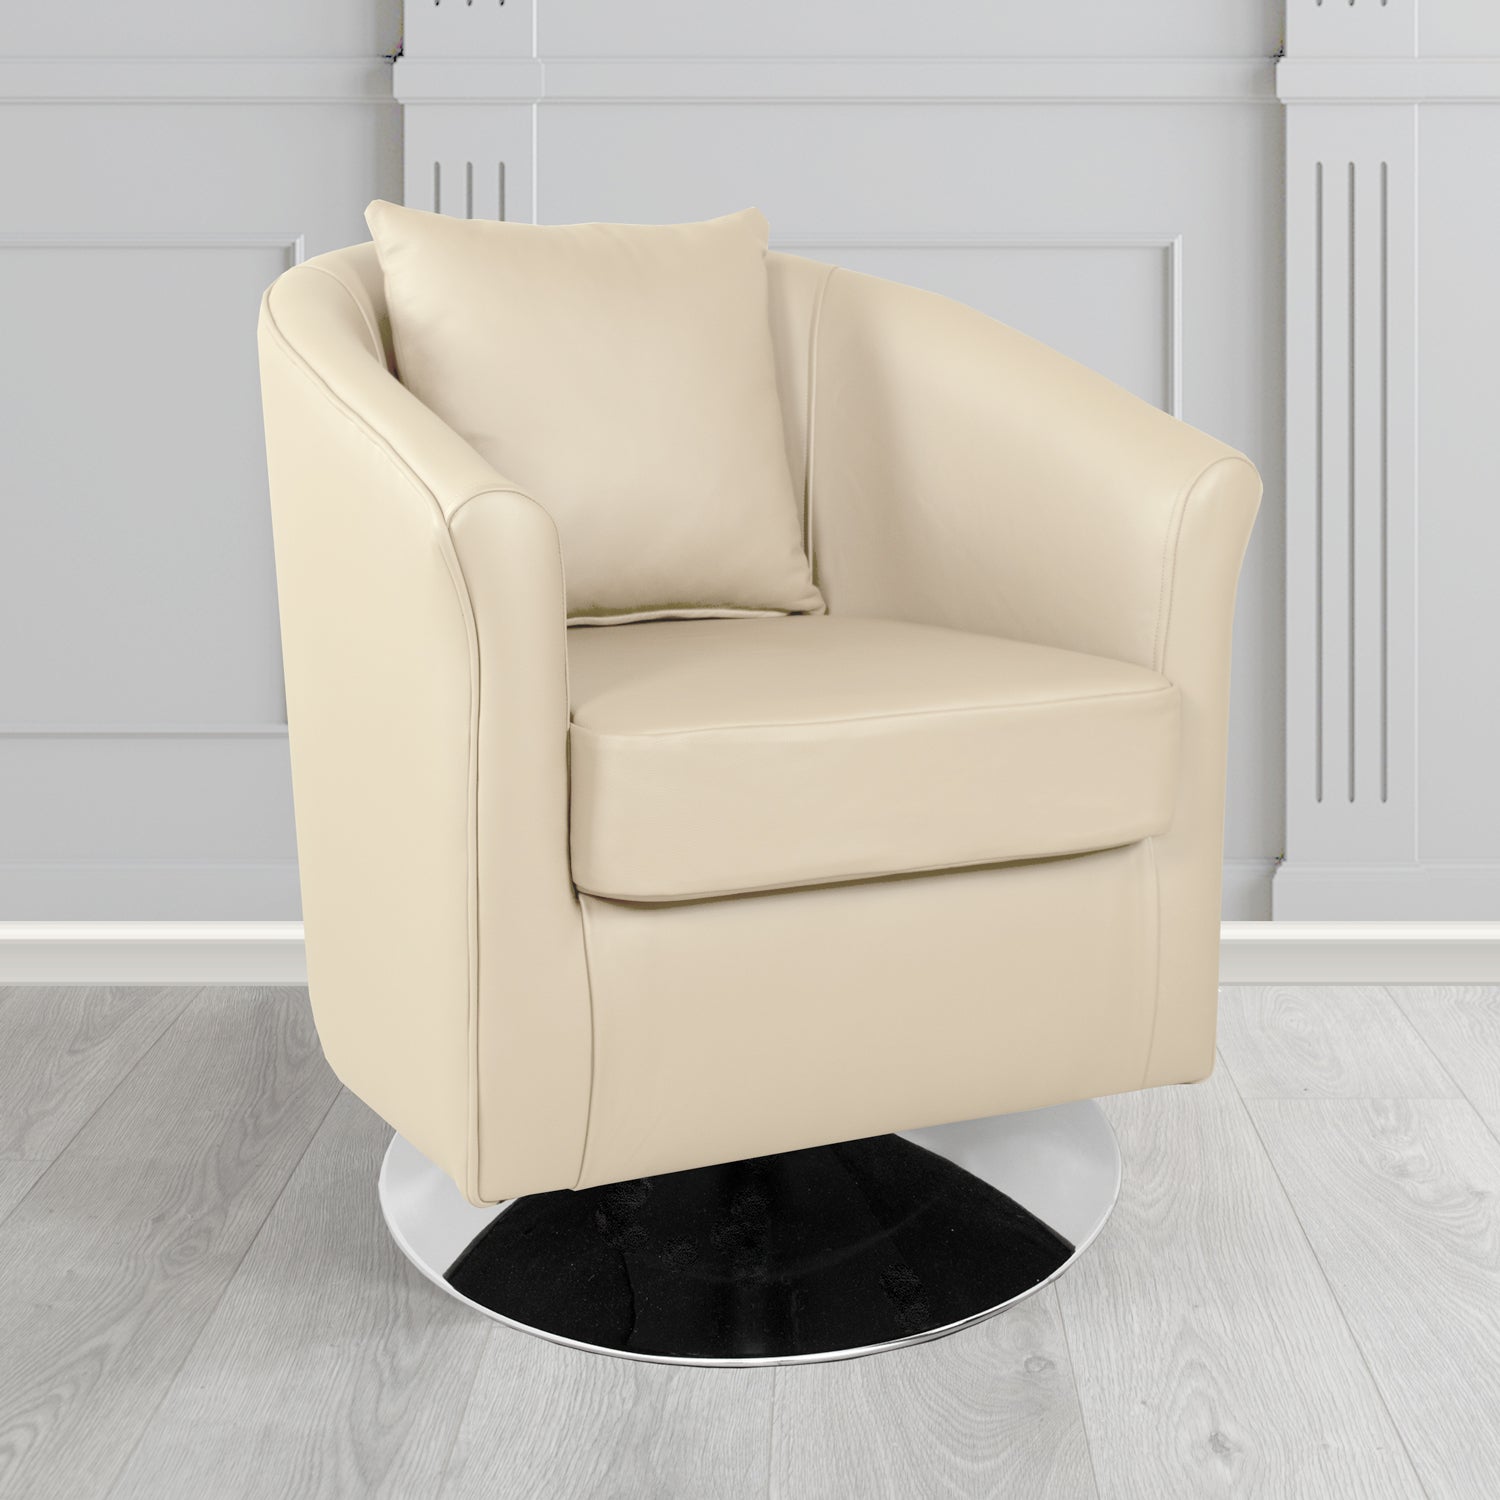 St Tropez Swivel Tub Chair in Contempo Ivory Crib 5 Genuine Leather with Scatter Cushion